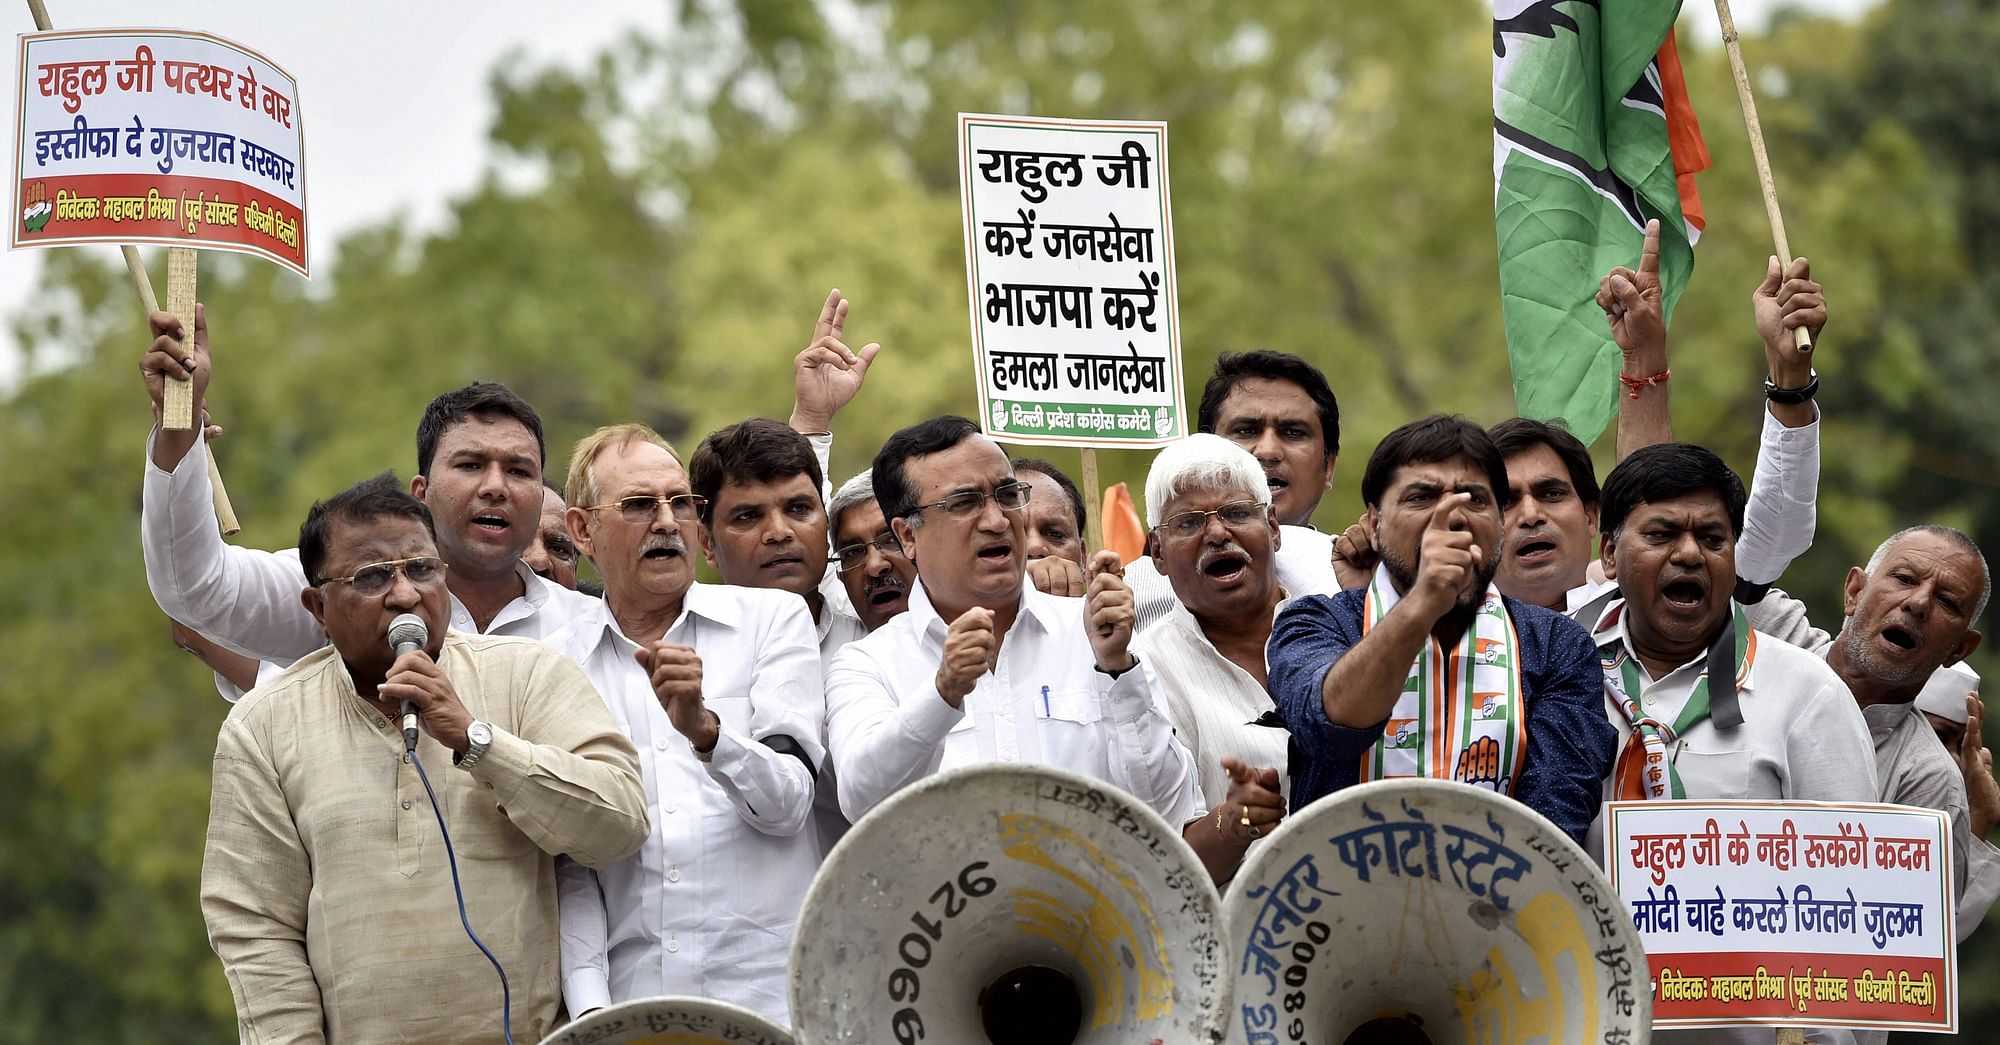 Congress leaders protest the attack on Congress VP Rahul Gandhi’s car.